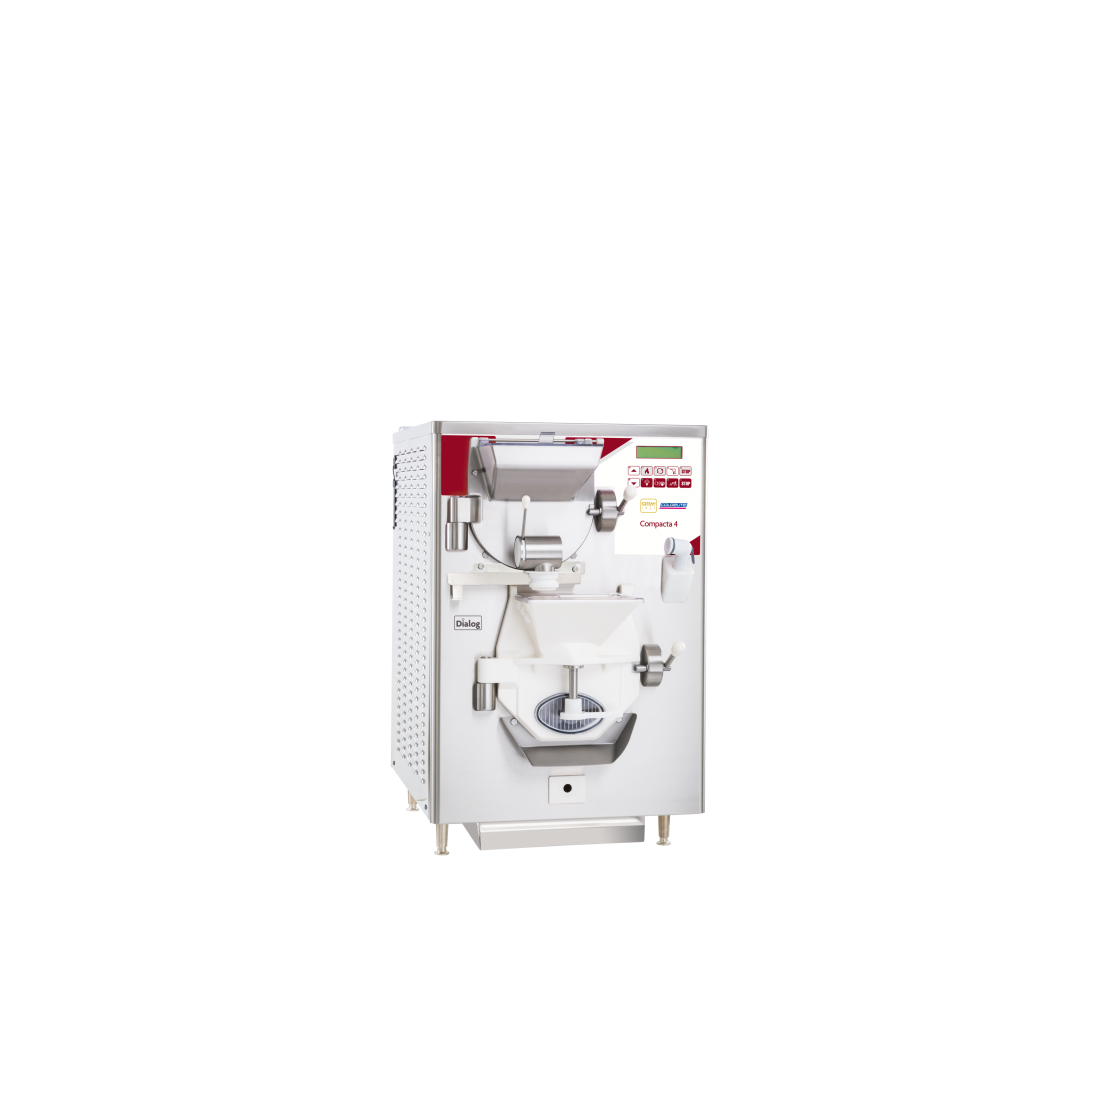 ICETEAM COMPACTA 4 SILVER COMBINED BATCH FREEZER|mkayn|مكاين